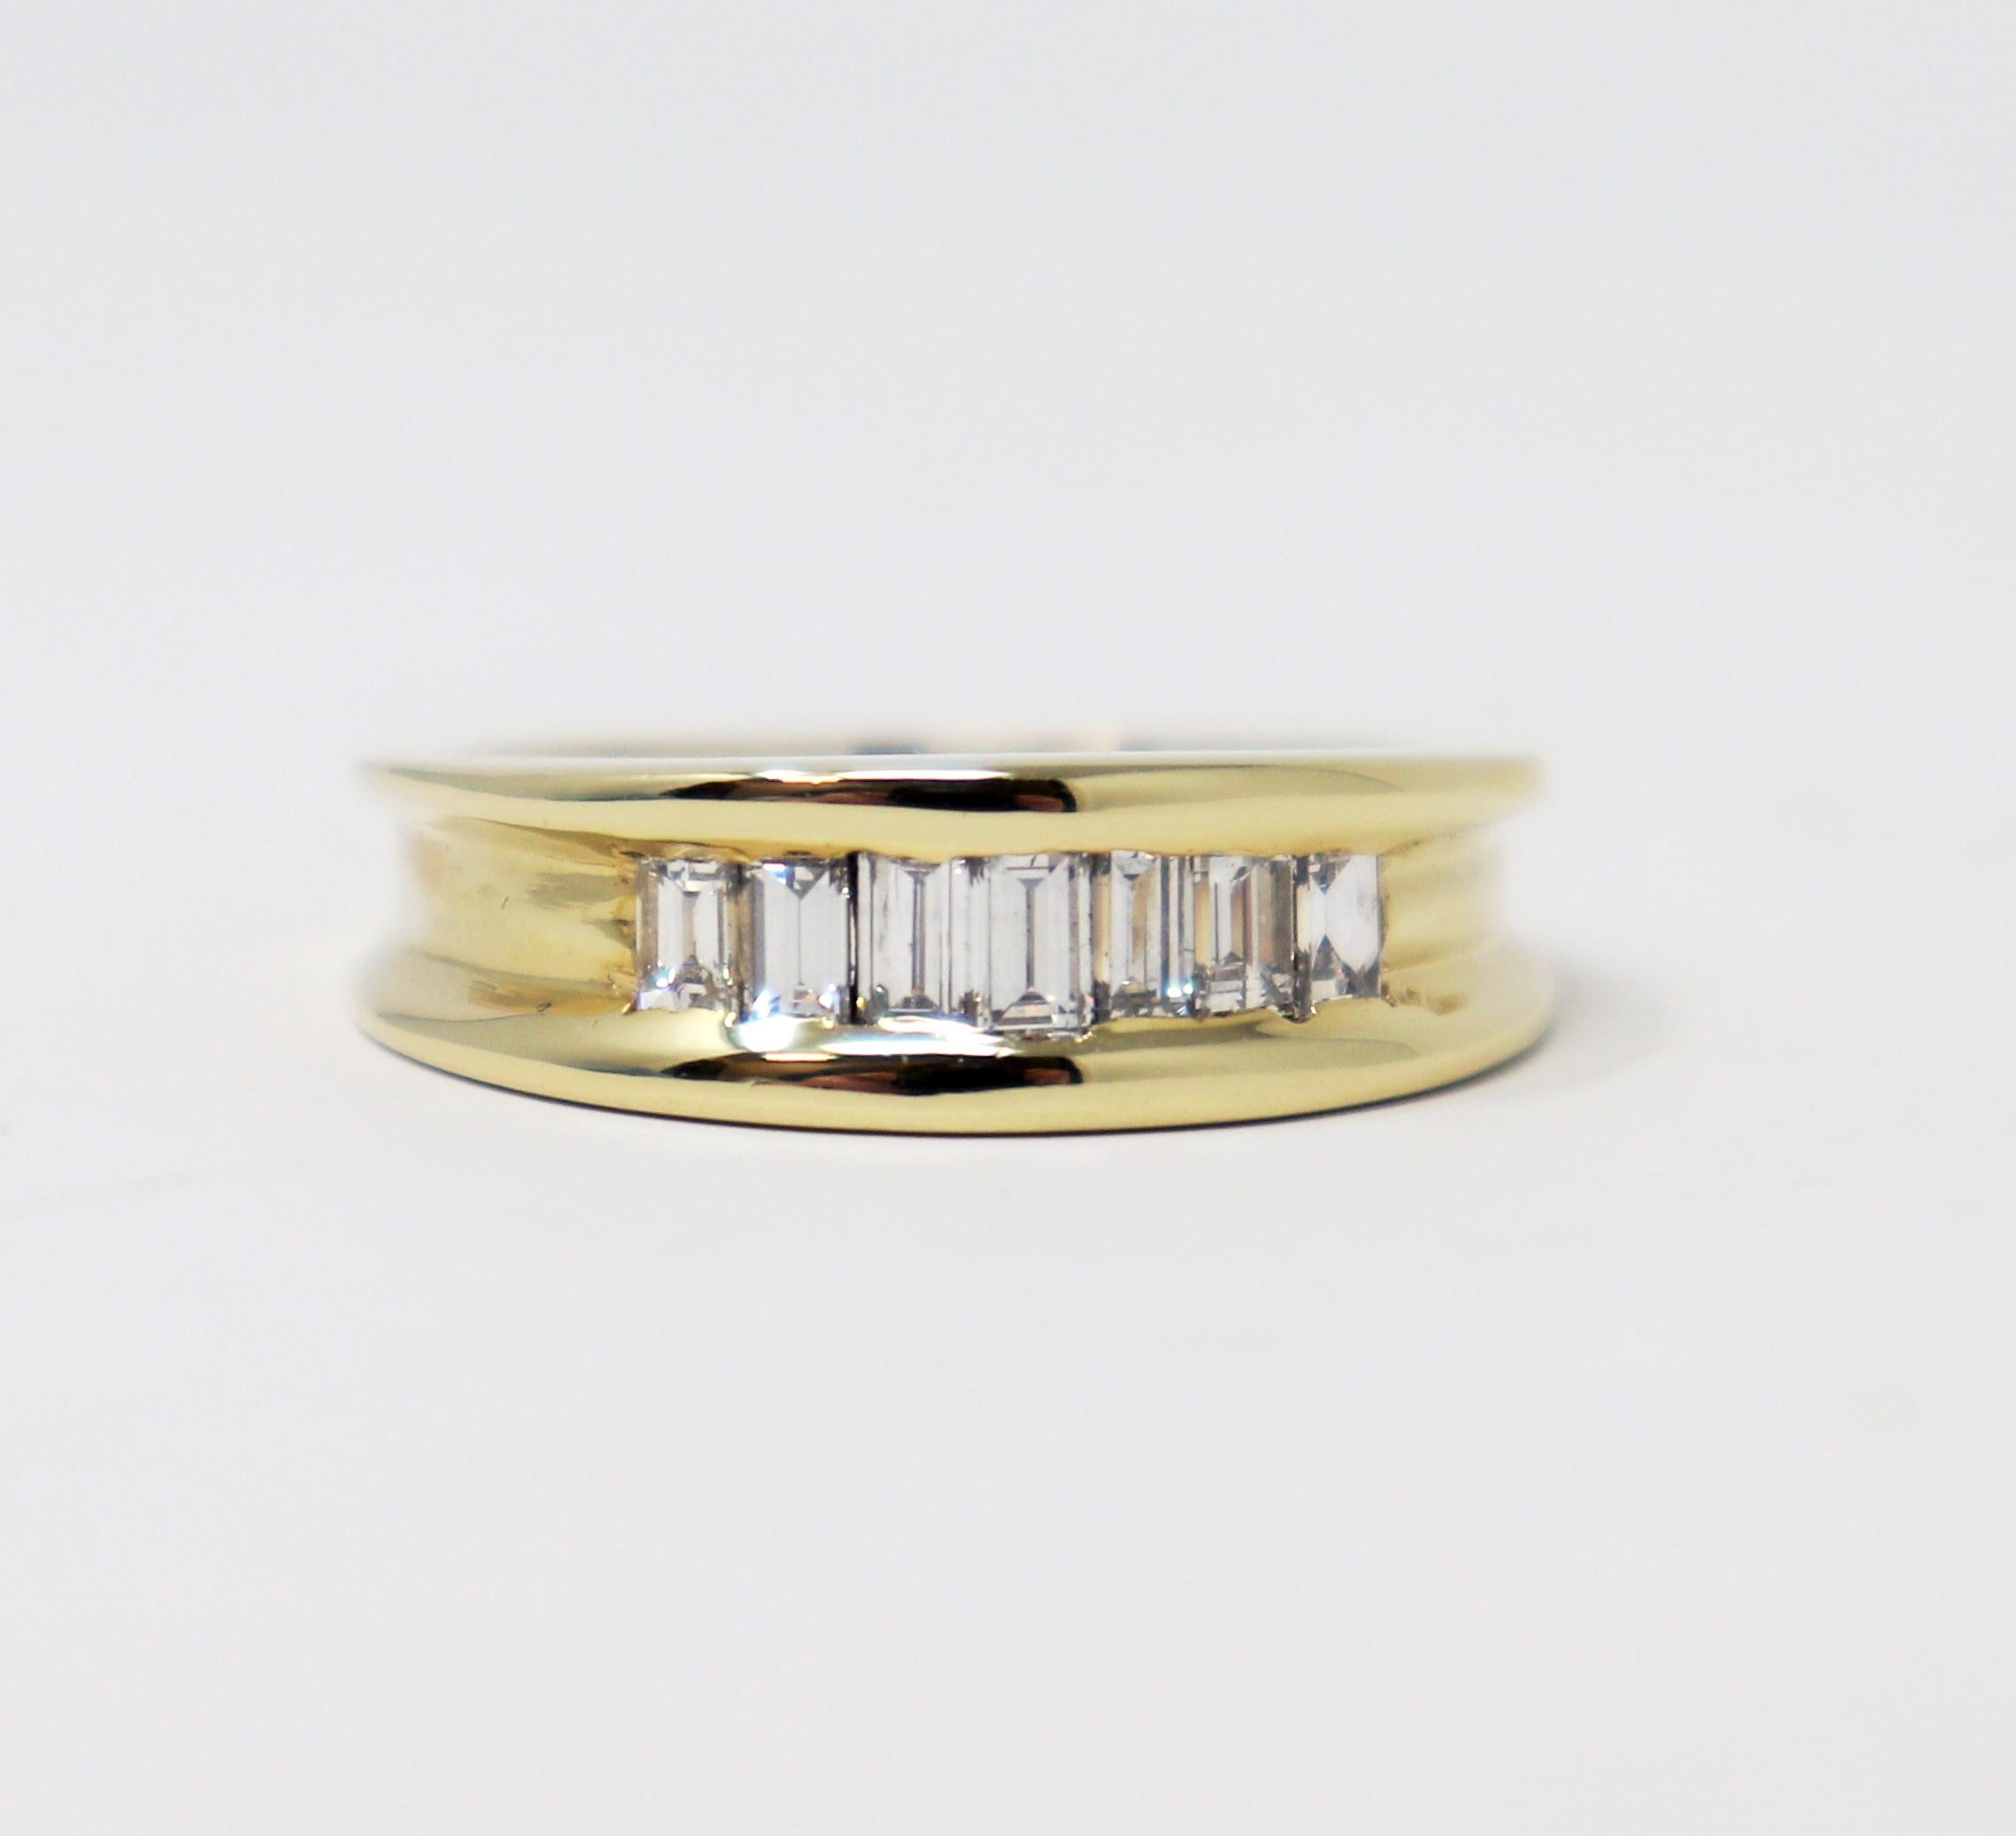 Ring size: 9.75

Sleek yet simple band ring embellished with sparkling diamonds. This timeless style features icy white baguette diamonds channel set in a single elegant row. The high polished band has a clean modern feel and versatile unisex style.